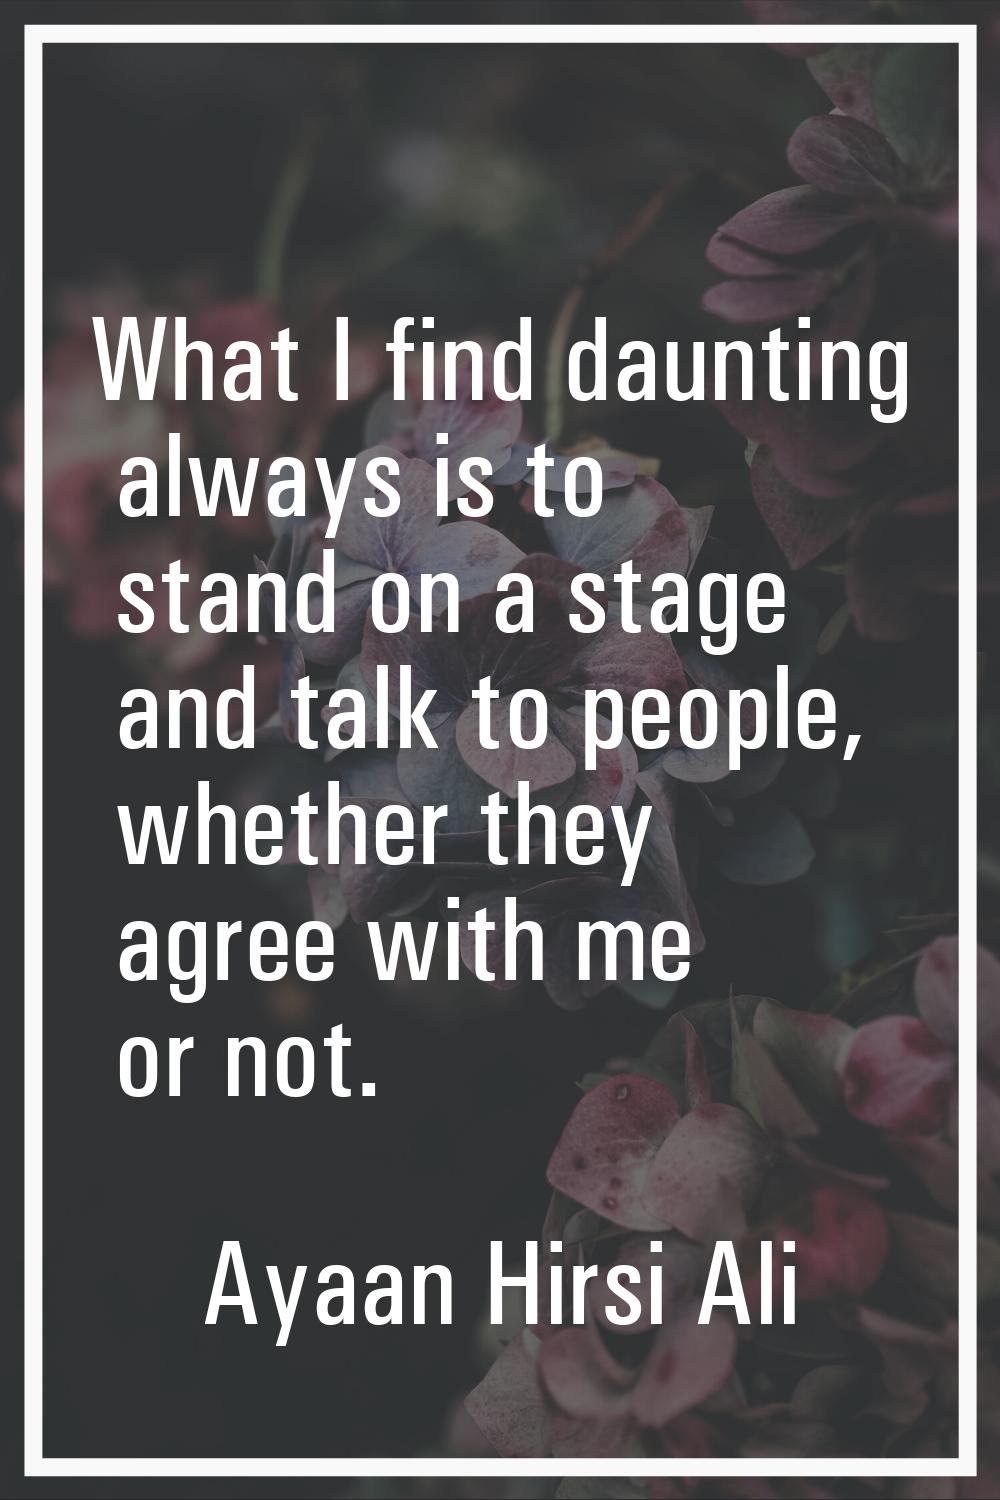 What I find daunting always is to stand on a stage and talk to people, whether they agree with me o